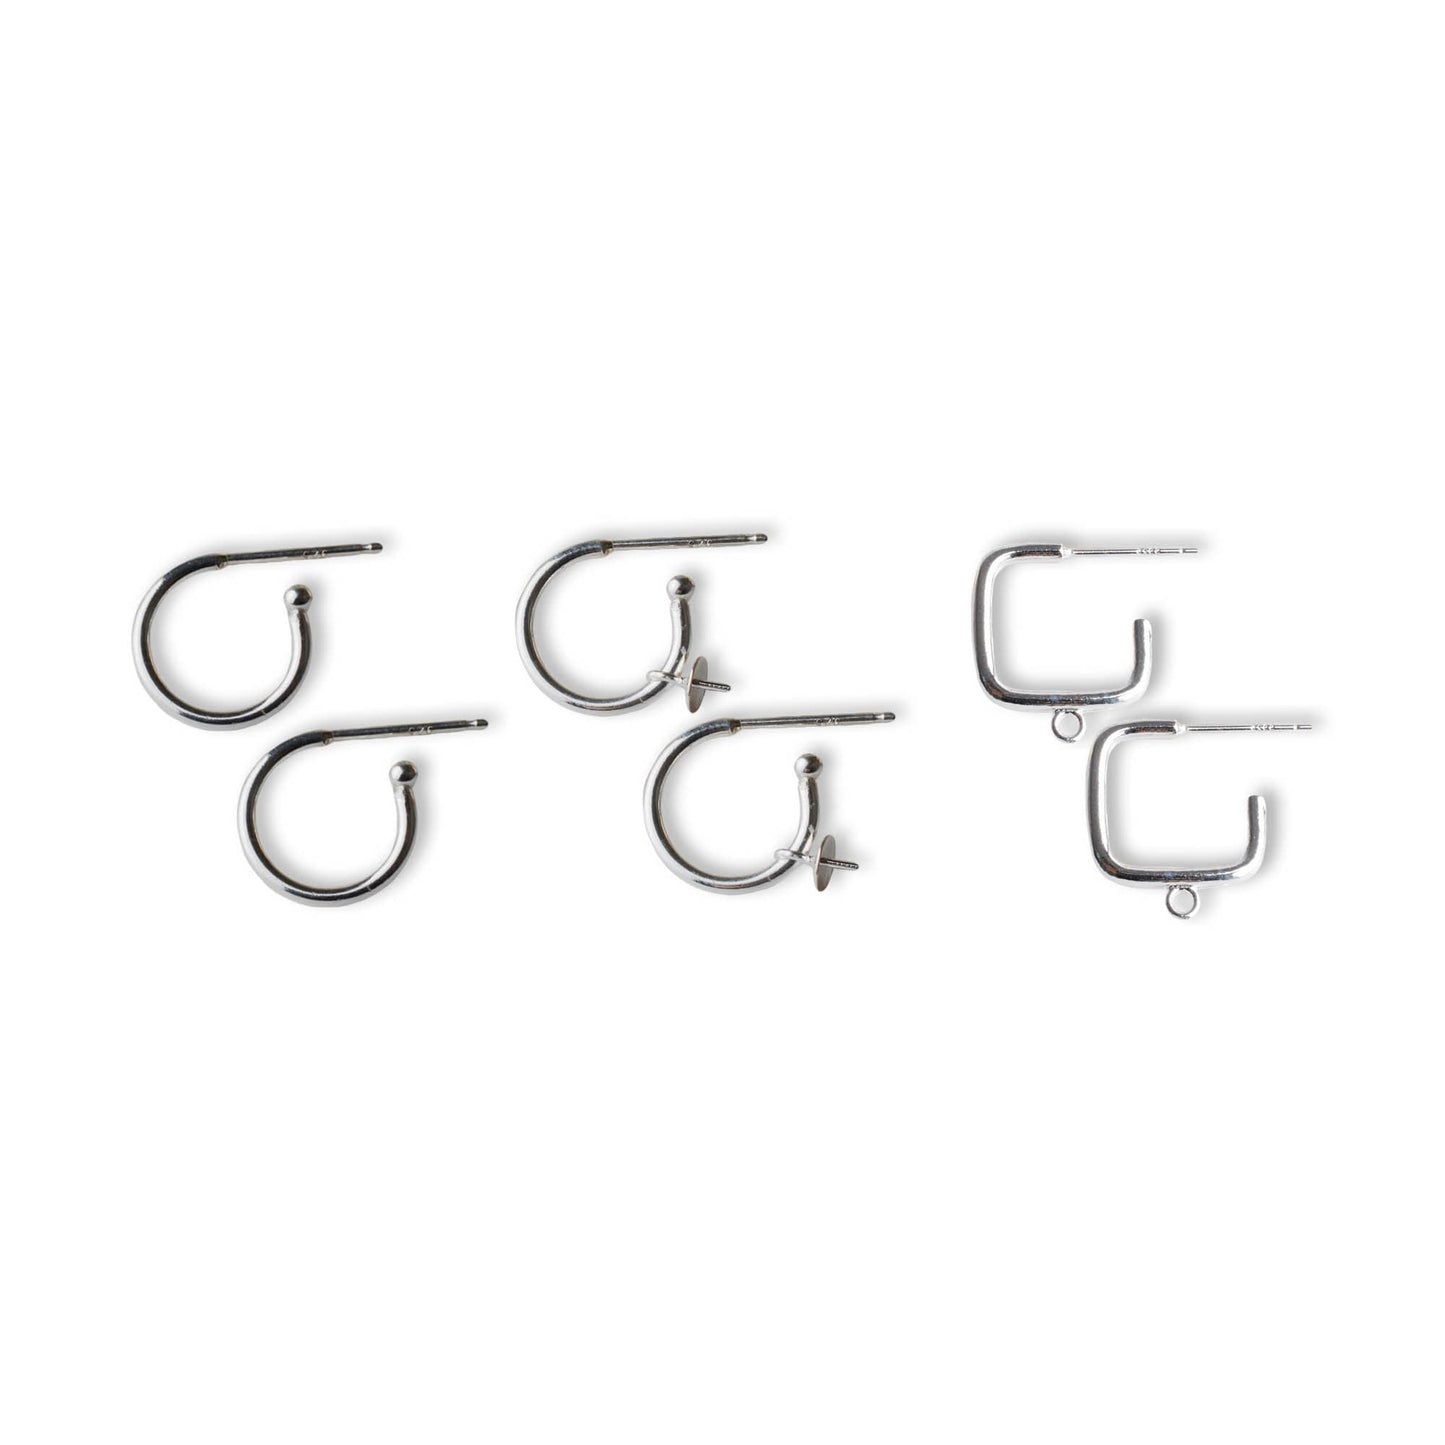 Eearwire Hook with Pin - 925 Sterling Silver Earring Findings - Round and Square Hoops - Jewelry Making Supplies and Components